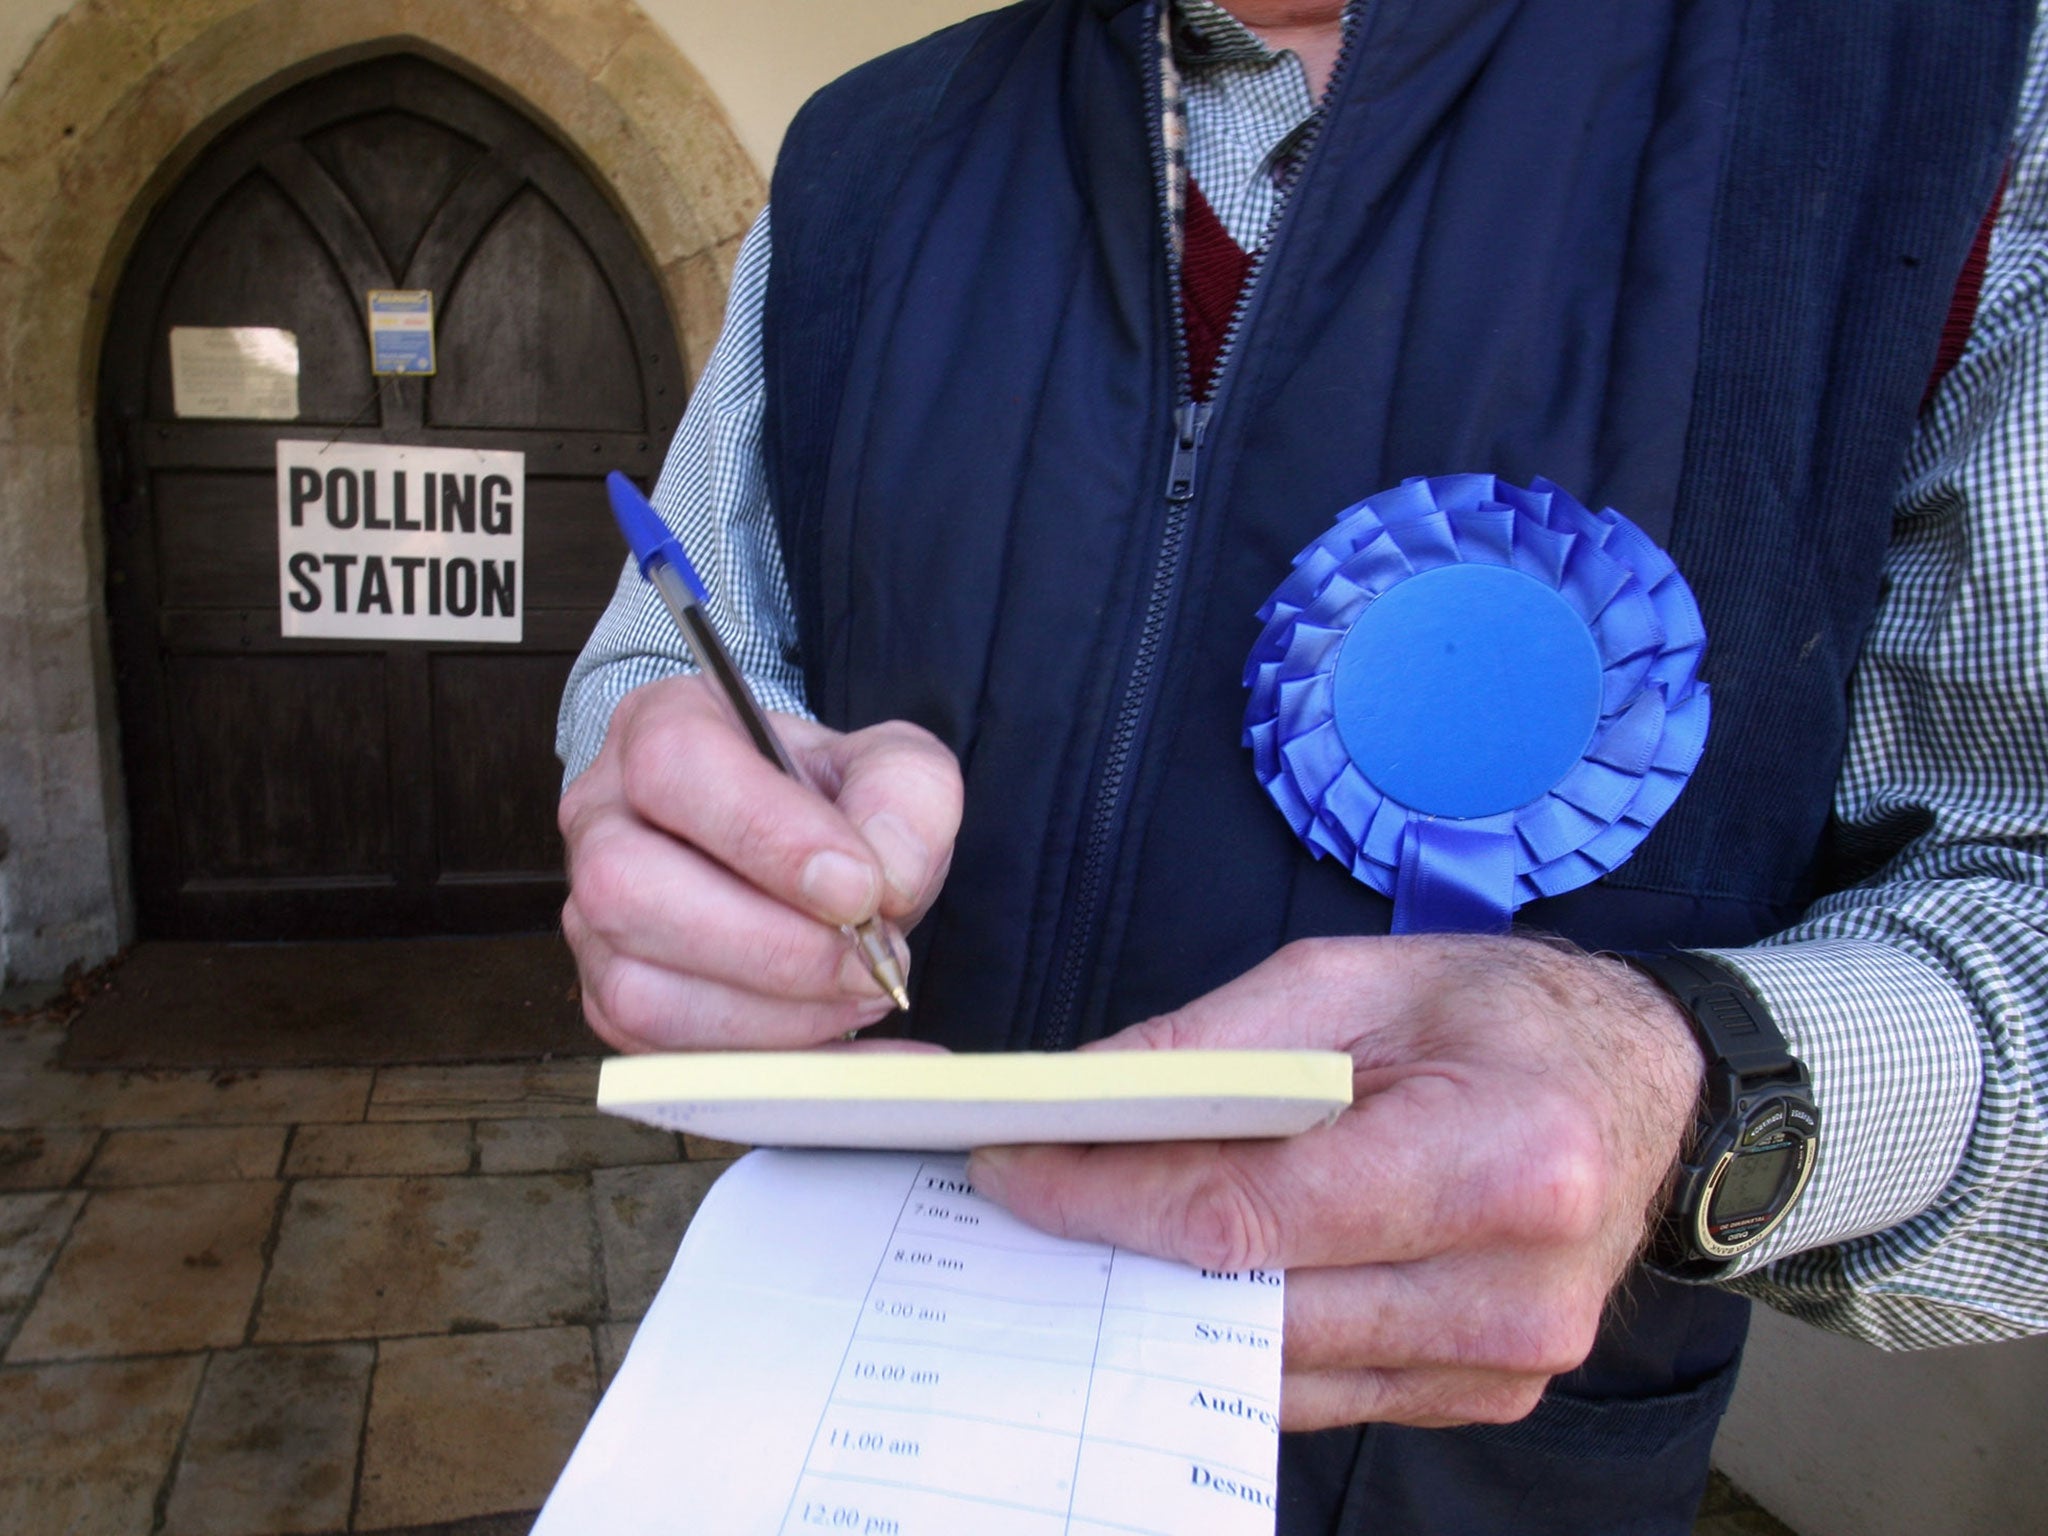 A teller collects data outside a polling station